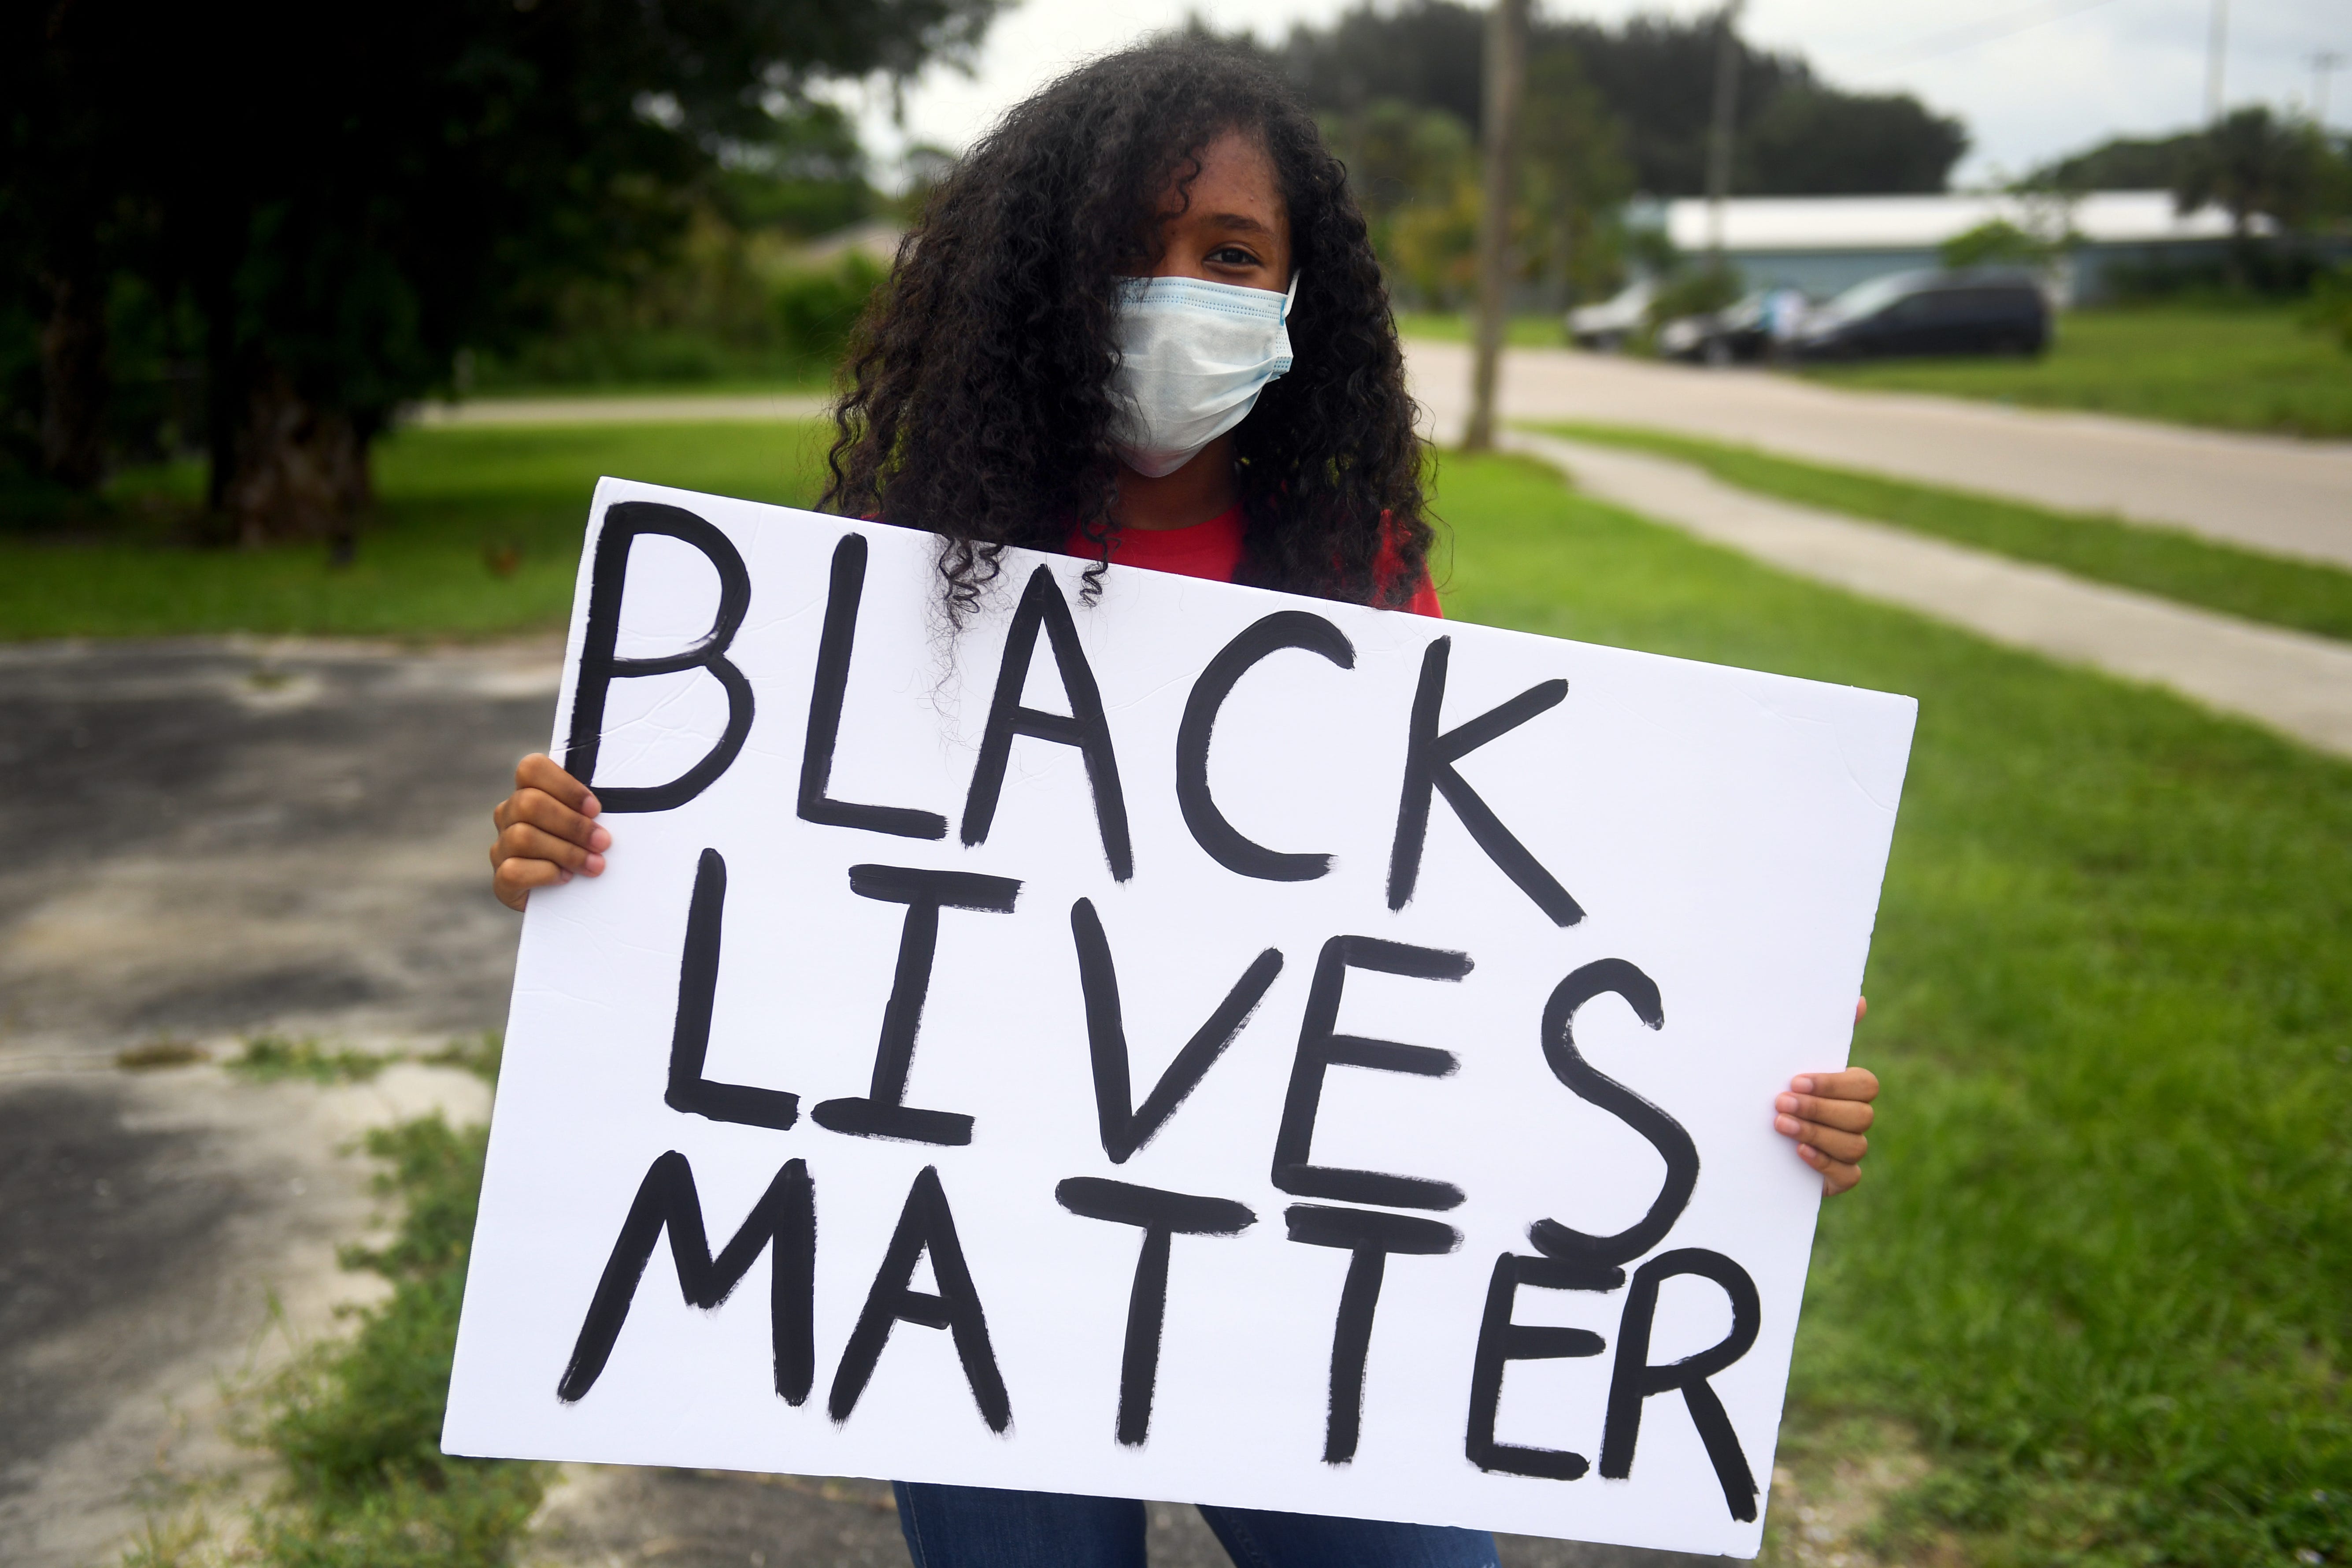 "I'm marching for my community, my family and my right to be treated equally," said Temazhen Slappey, 15, of Indiantown, during a Black Lives Matters march Sunday, June 7, 2020, in Booker Park.